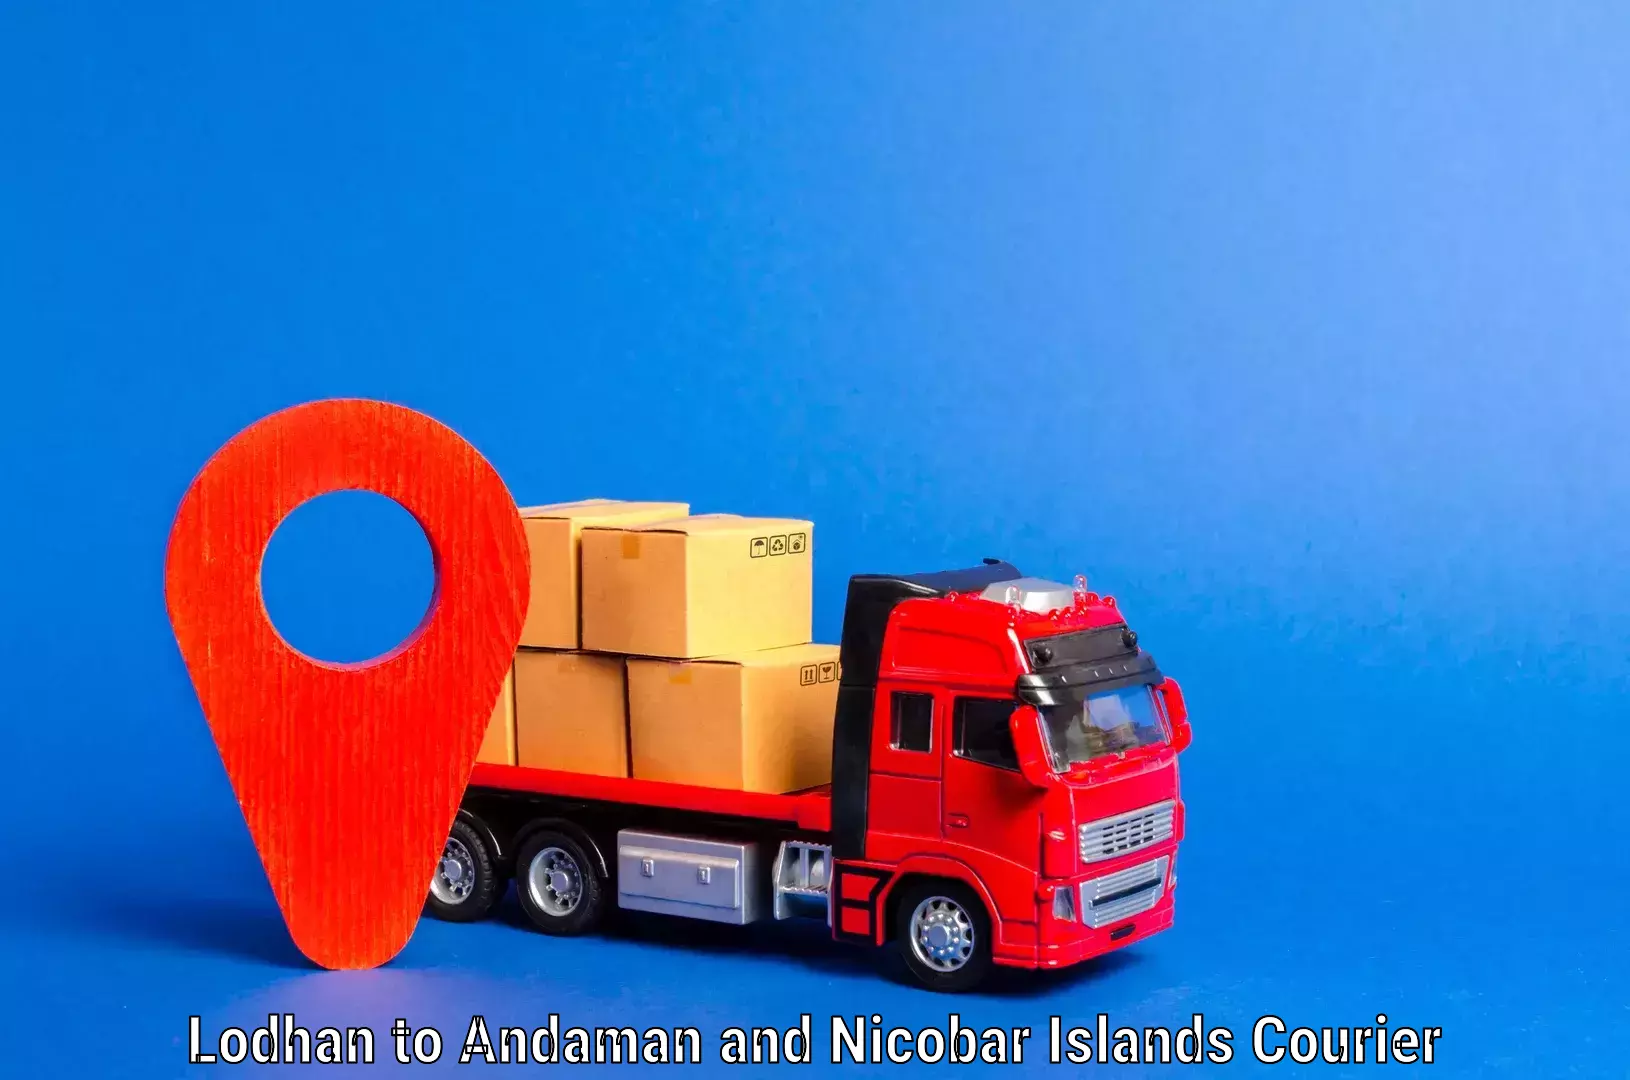 Professional moving assistance Lodhan to Andaman and Nicobar Islands